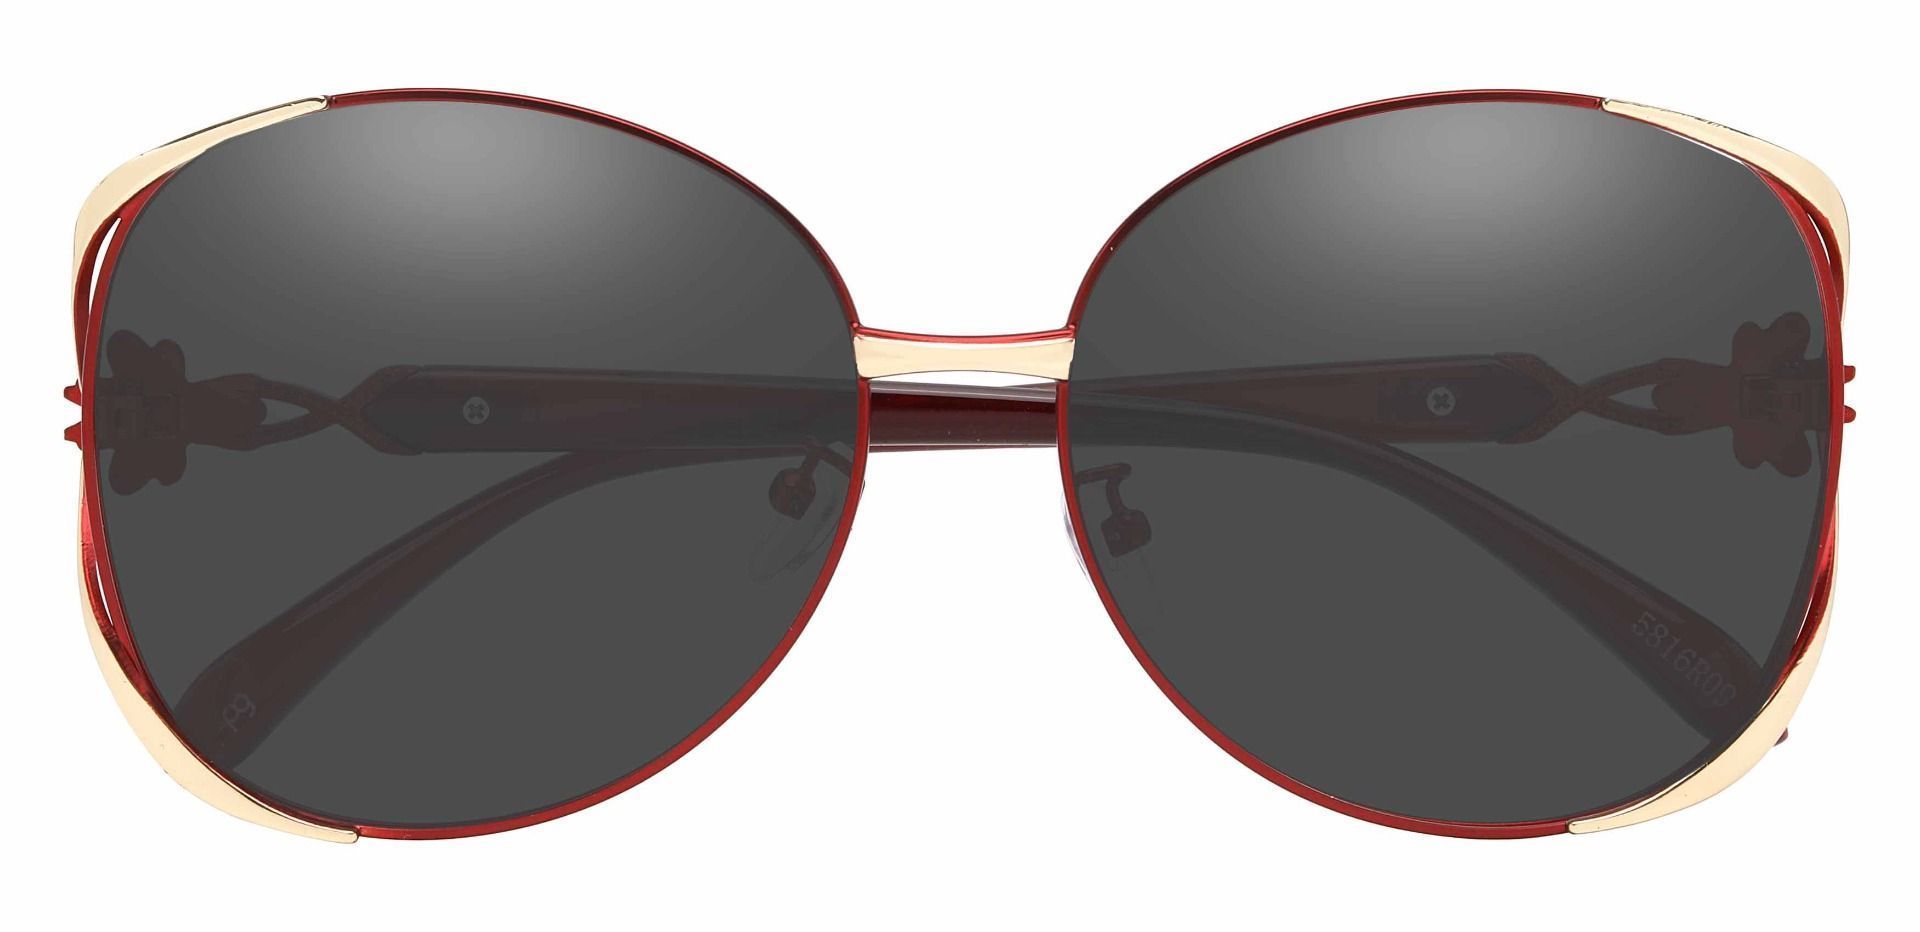 Nina Round Reading Sunglasses - Red Frame With Gray Lenses